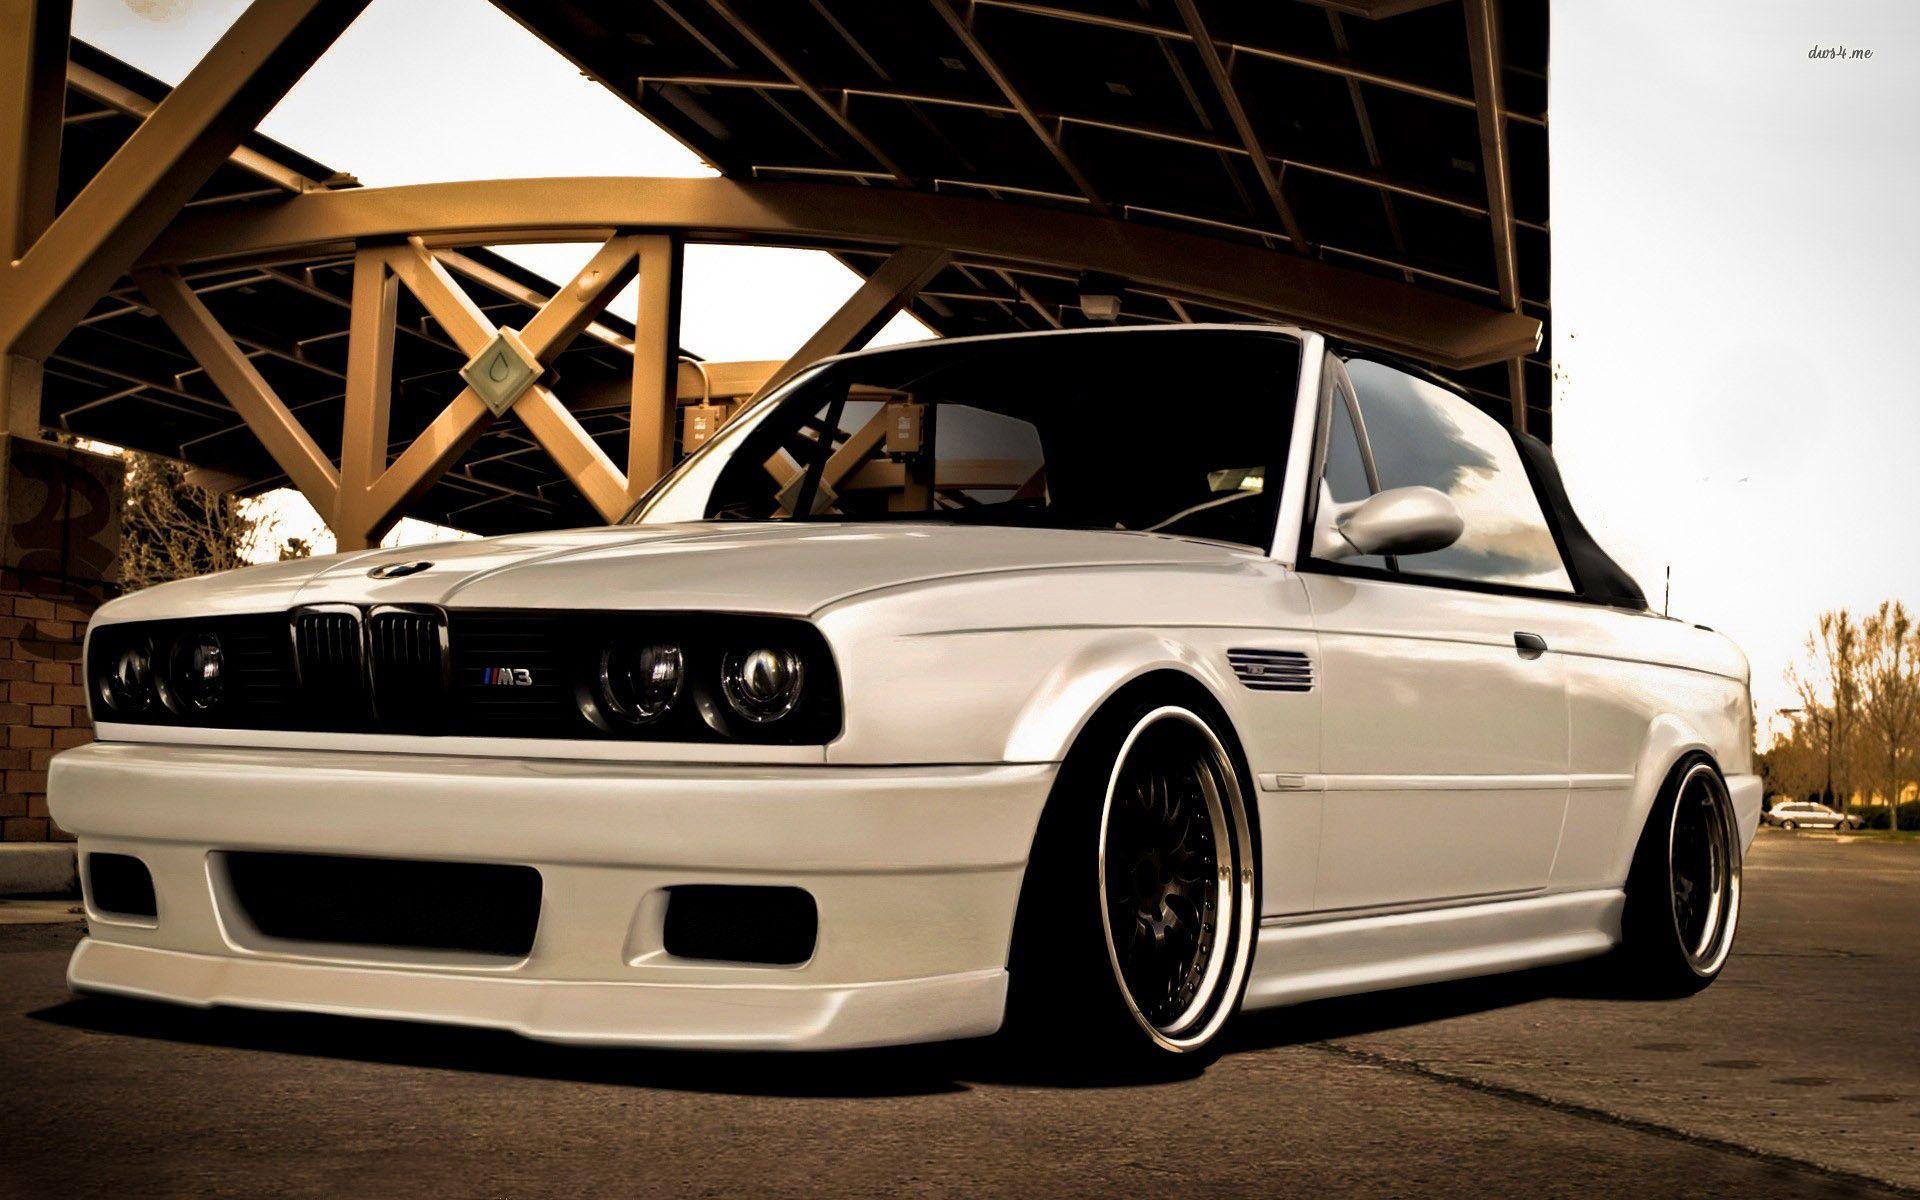 Bmw Old Models Wallpapers